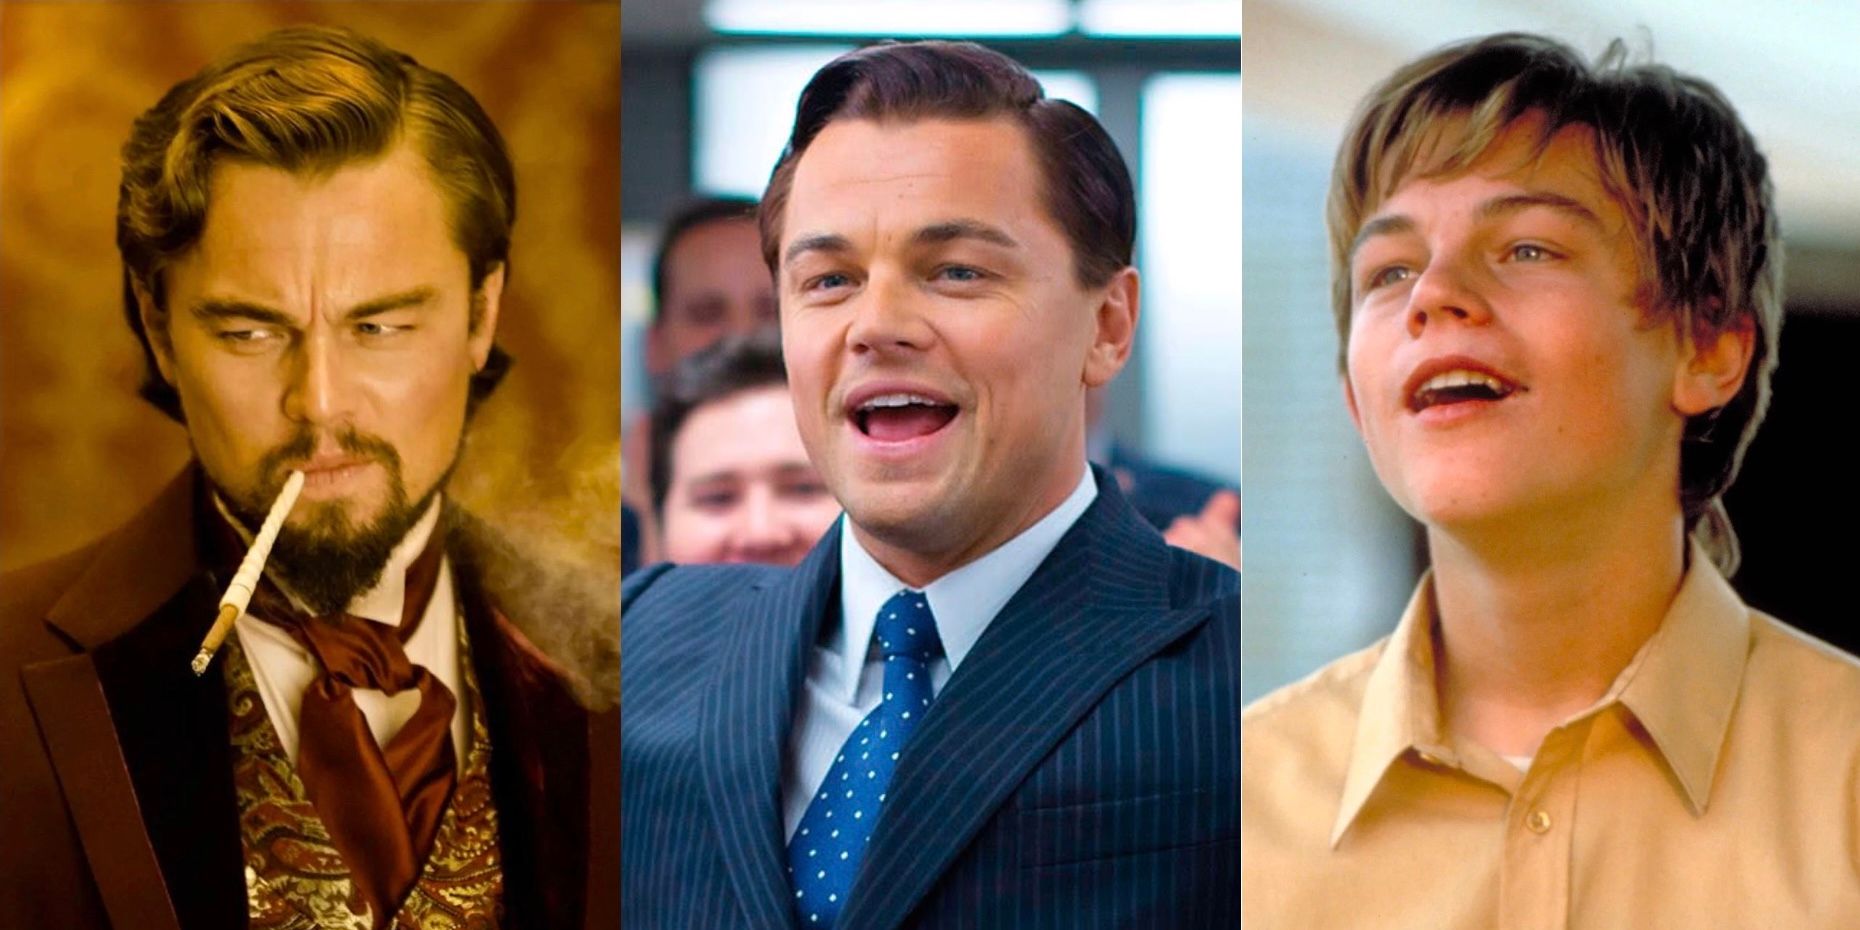 Leonardo DiCaprio performances: Django Unchained, The Wolf of Wall Street, and What's Eating Gilbert Grape